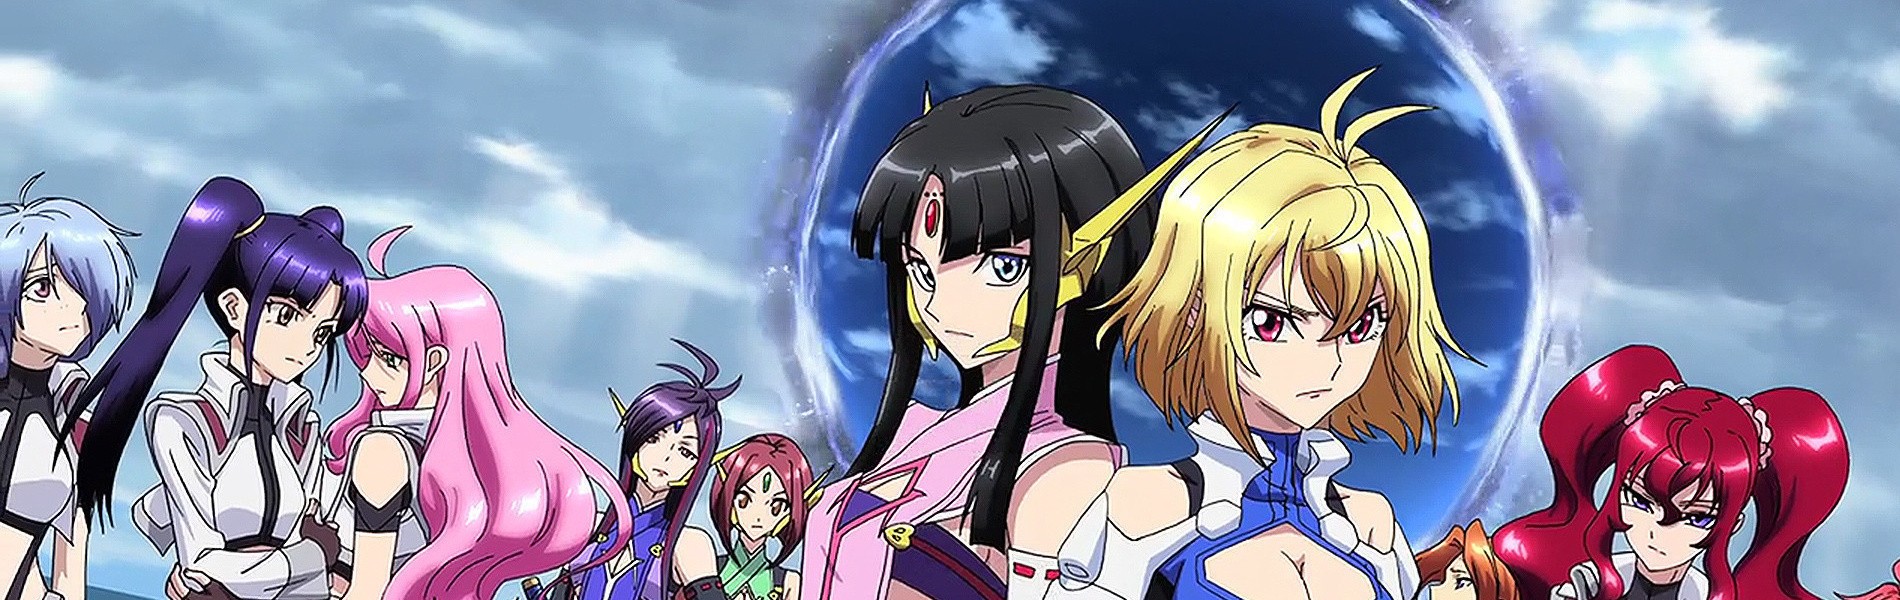 Tuesday New Releases: Cross Ange: Rondo of Angel and Dragon